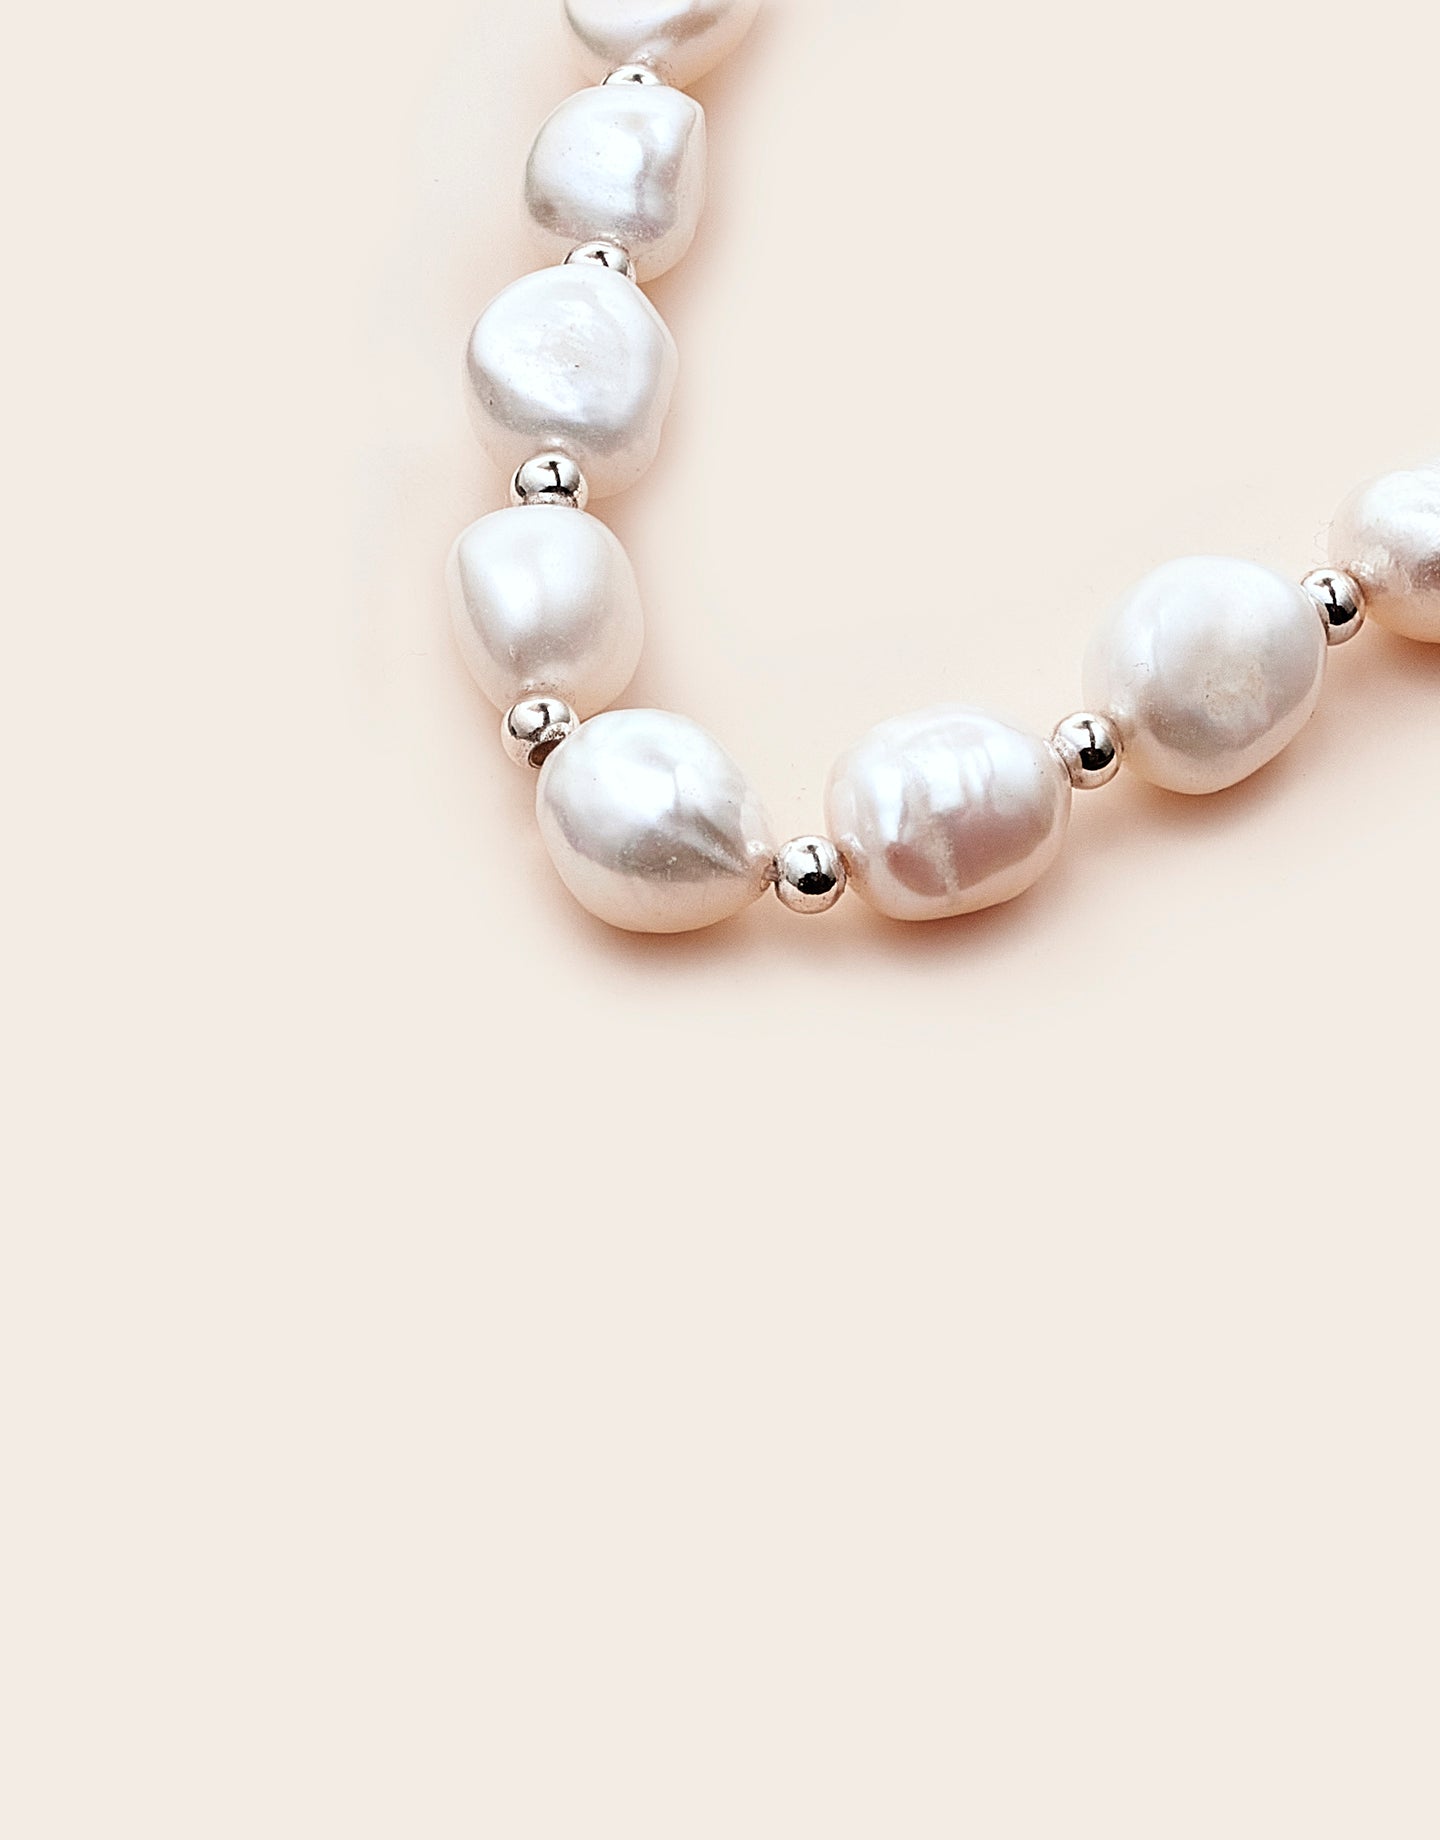 whistle-and-pop-necklace-pearl-7